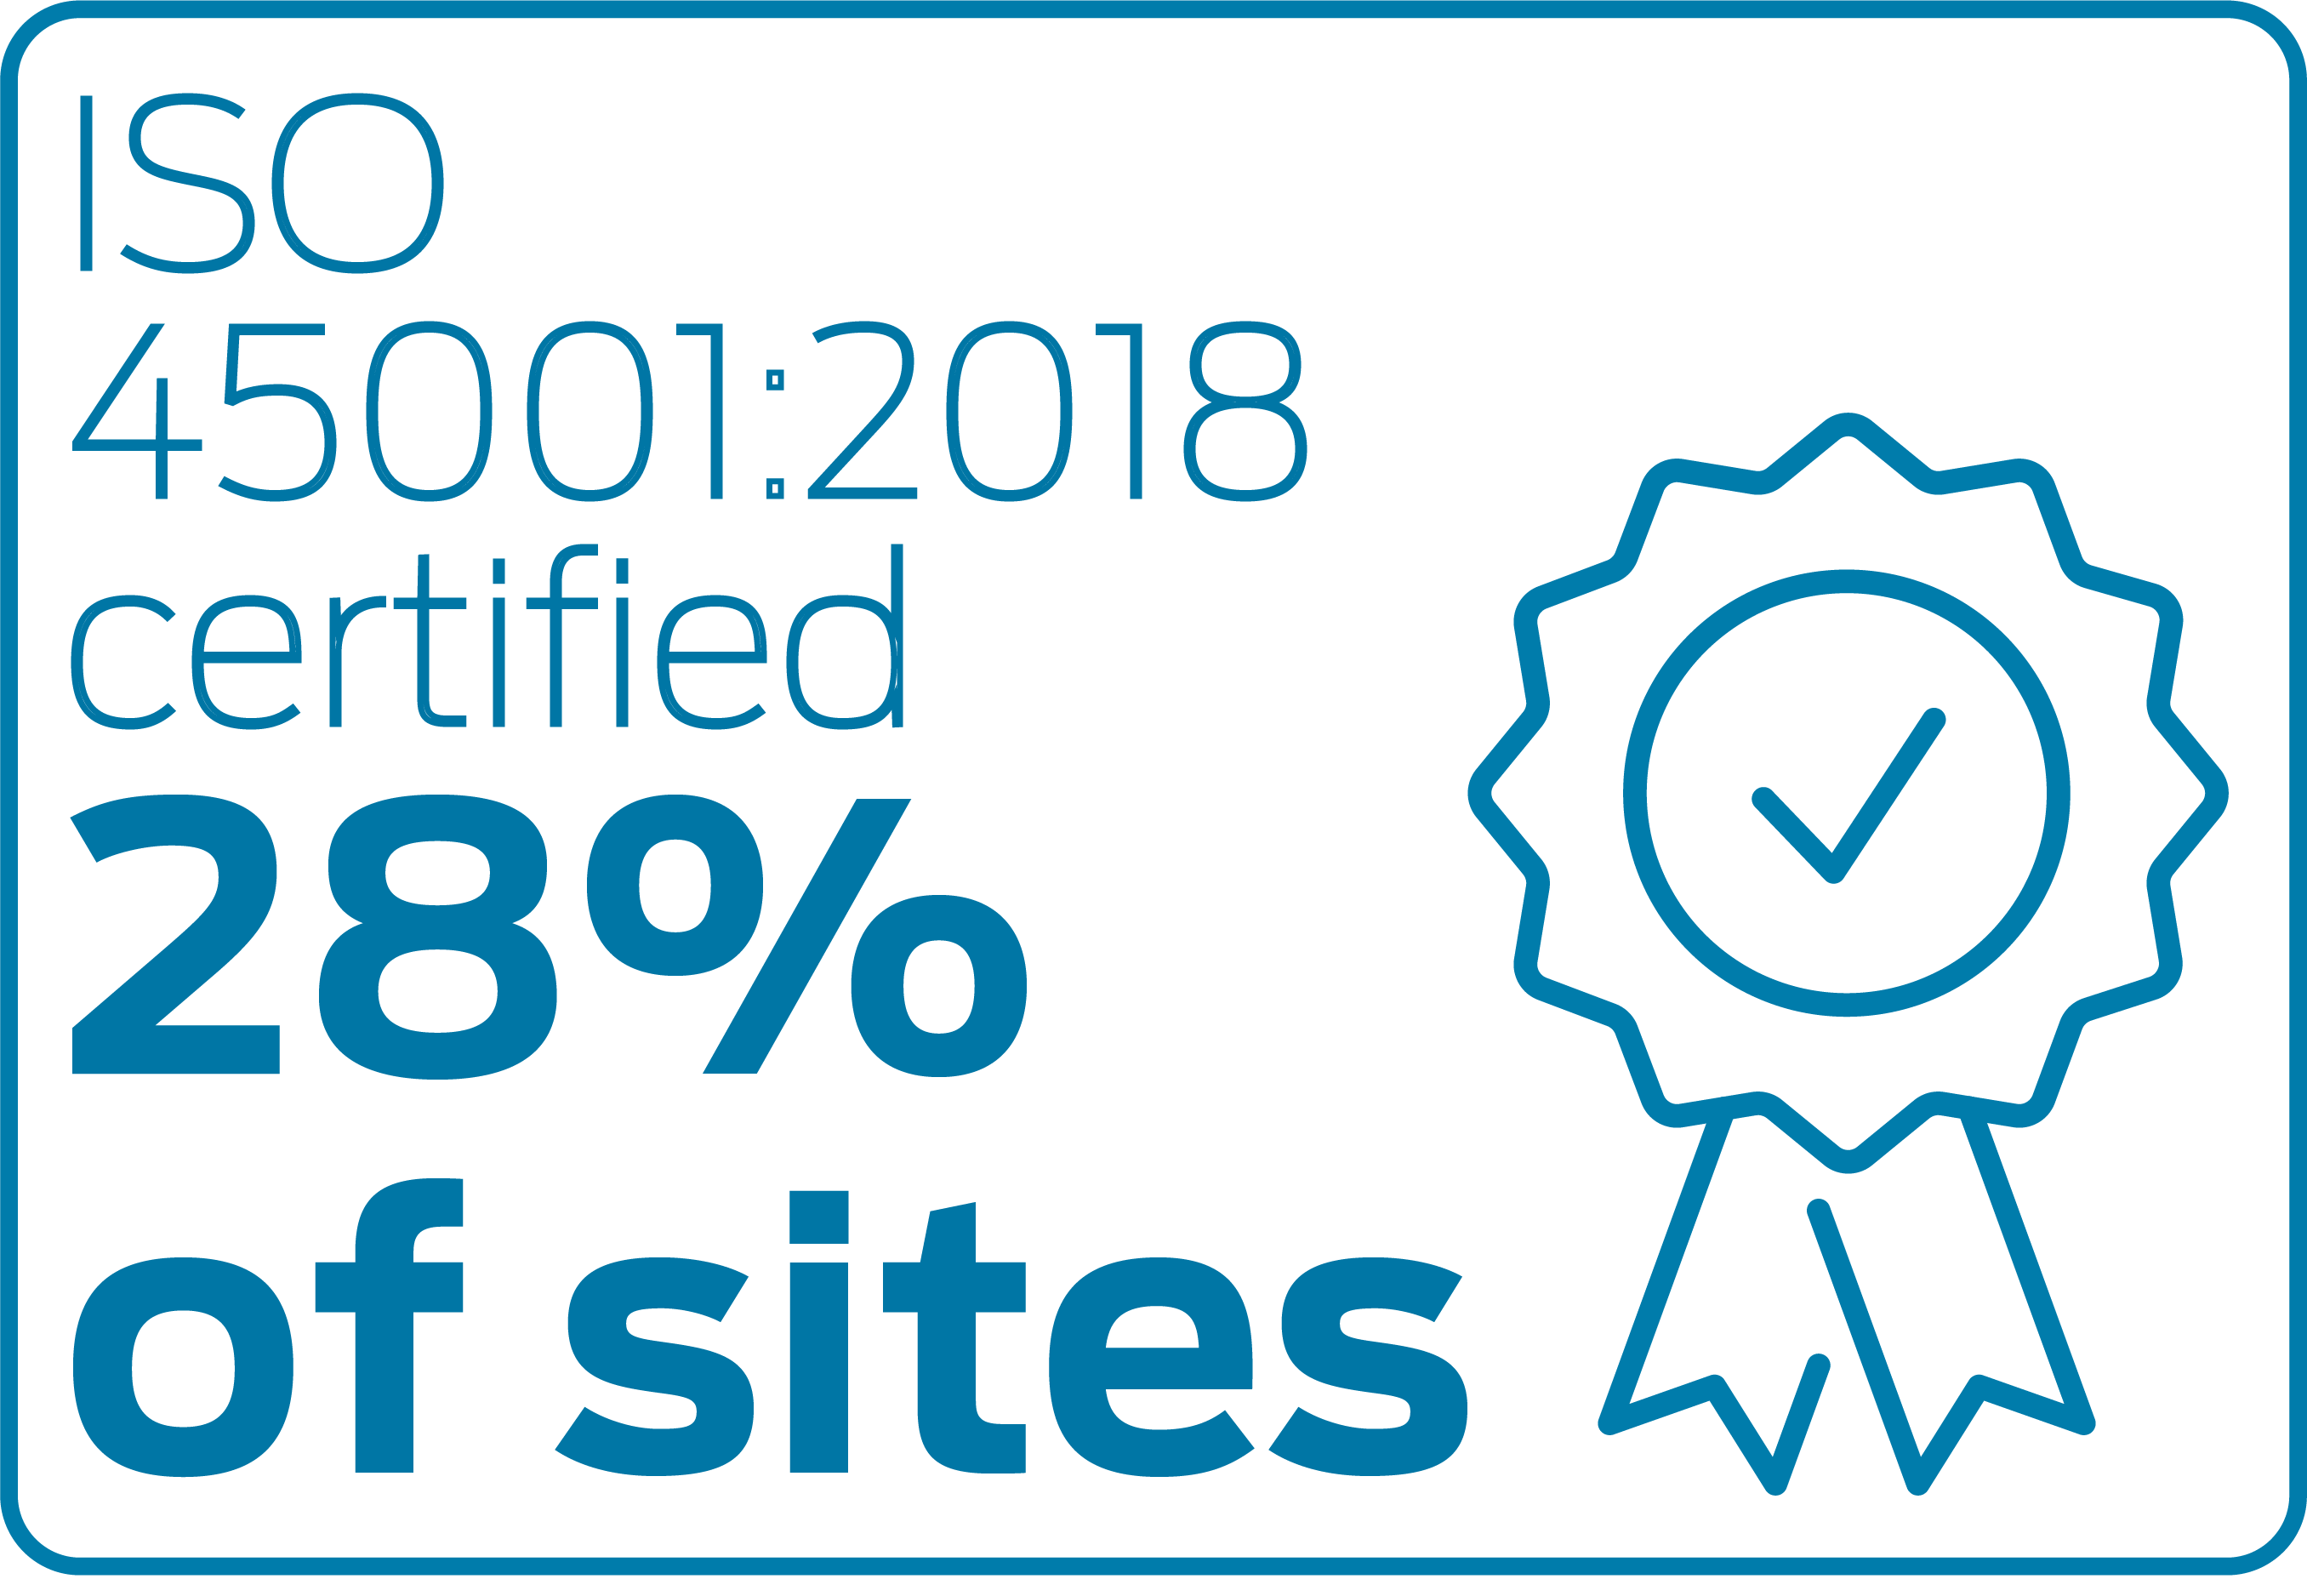 ISO 45001:2018 certified 28% of sites